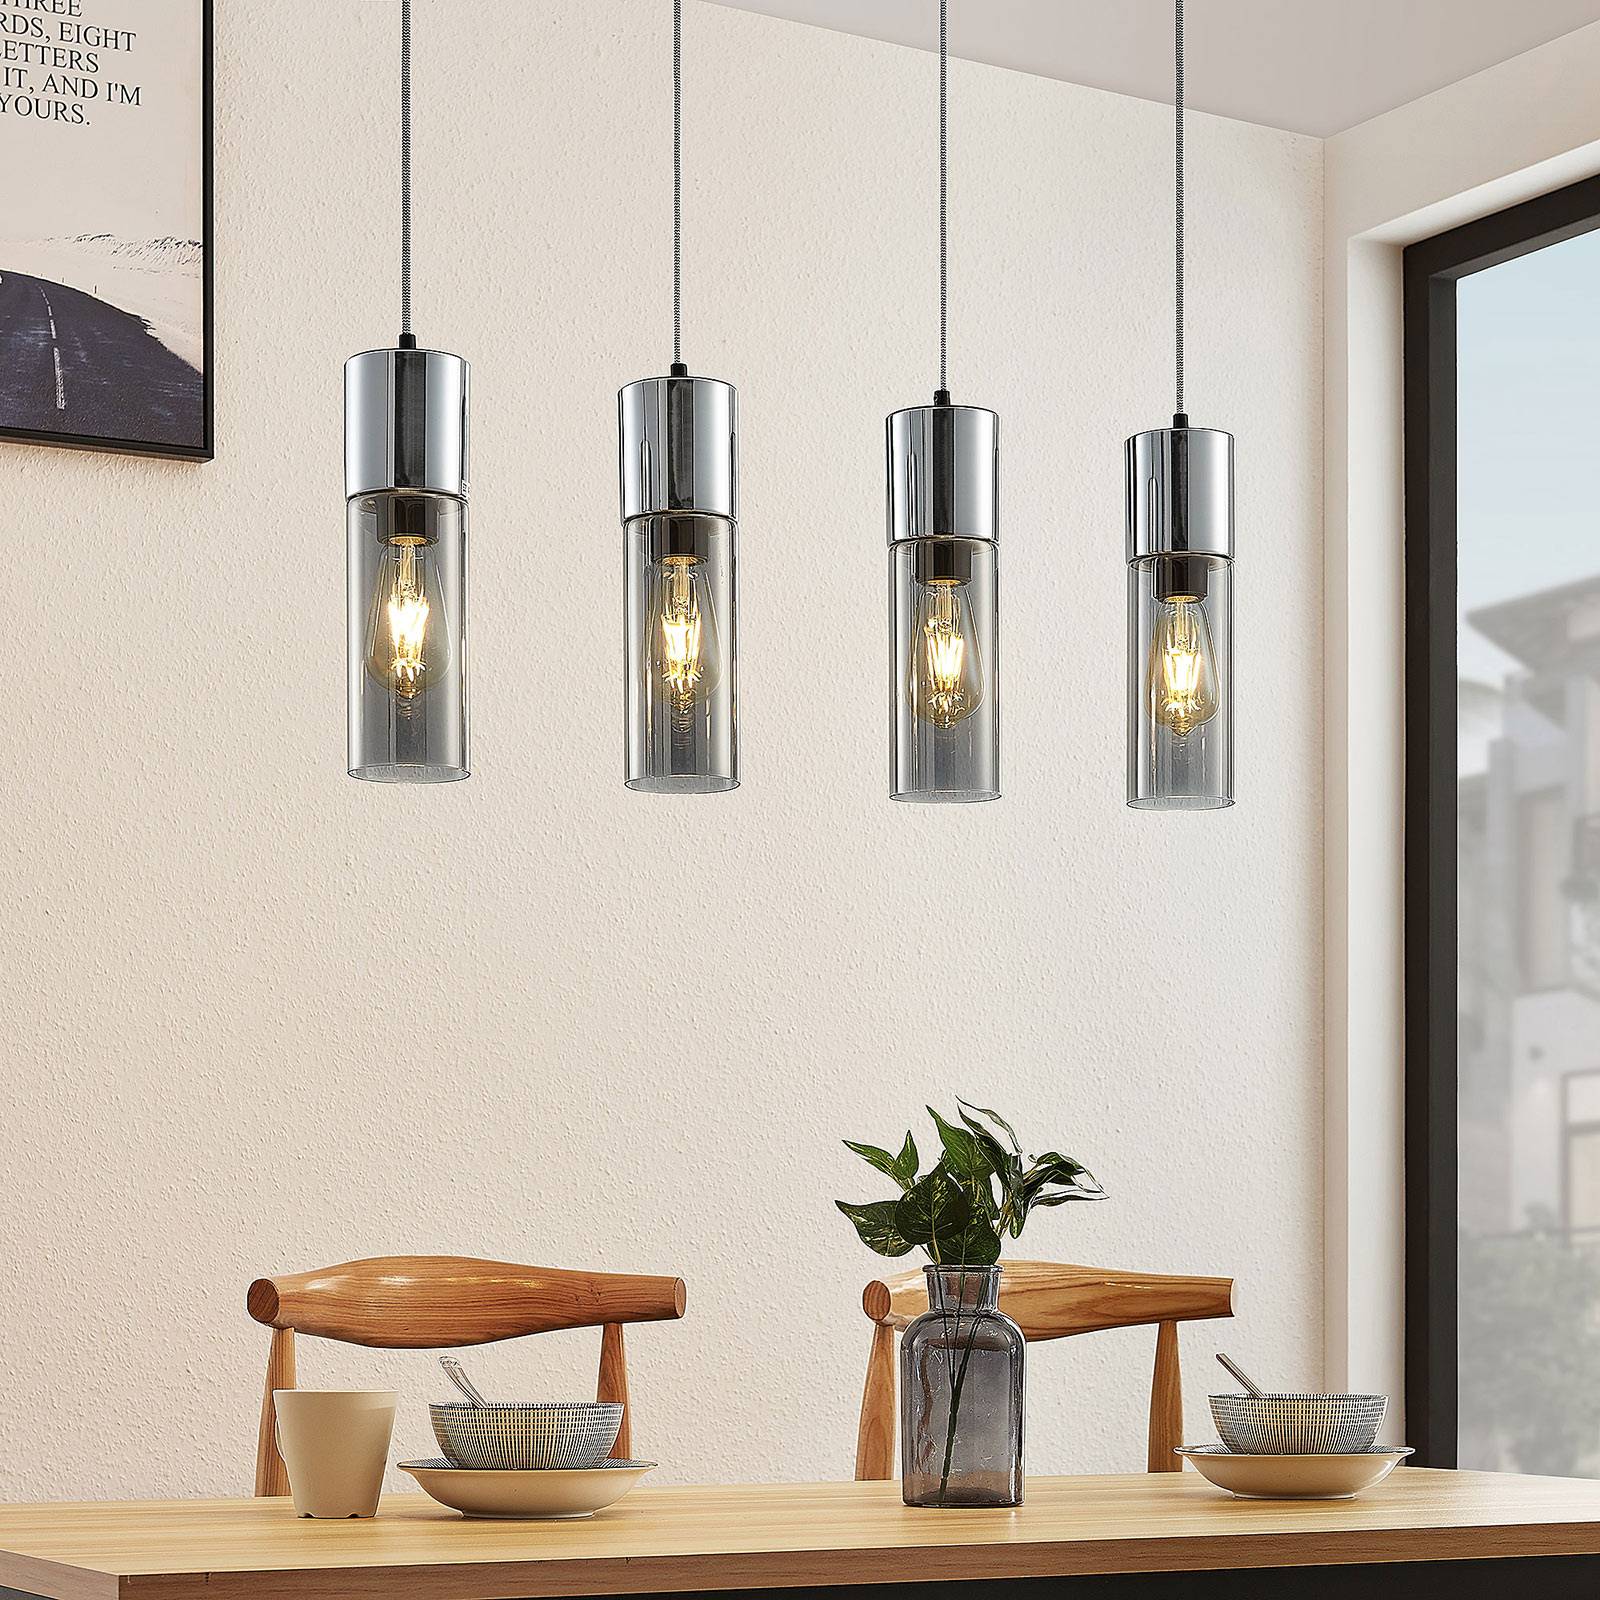 Photos - Chandelier / Lamp Lindby Eleen pendant lamp with 4 smoked glass cylinders 